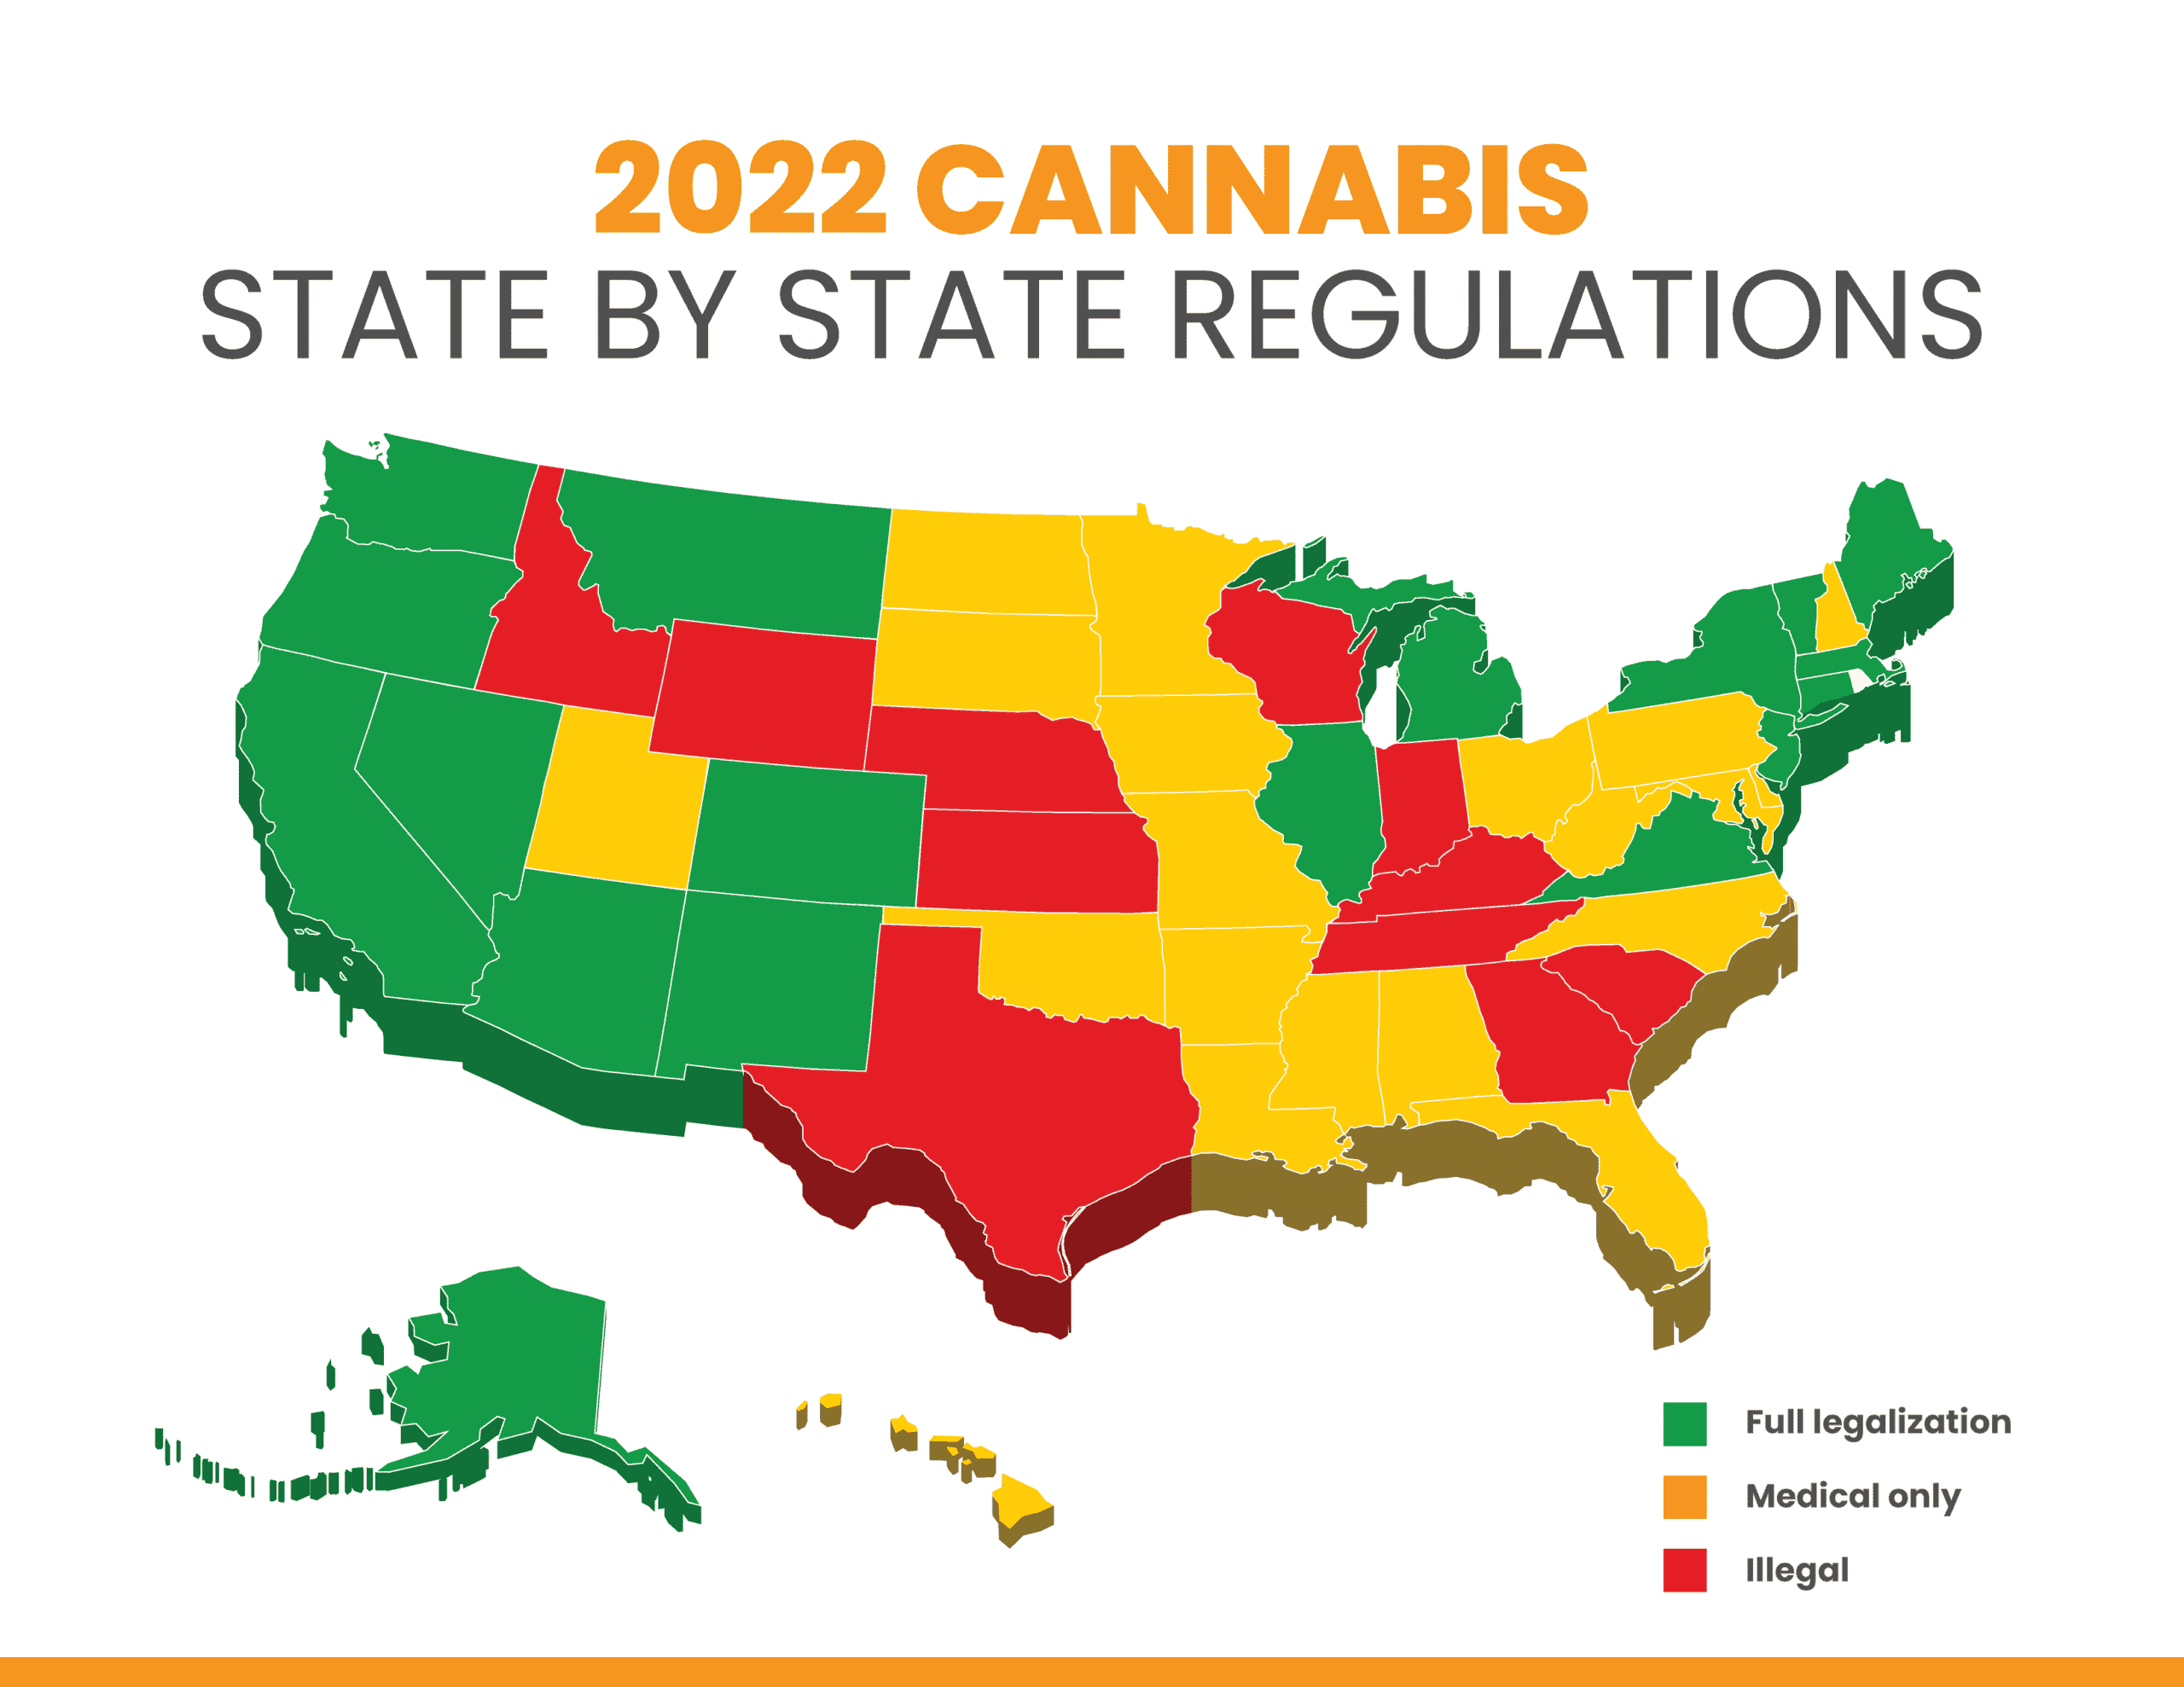 A color coded map showing the legal status of cannabis in each state for 2022